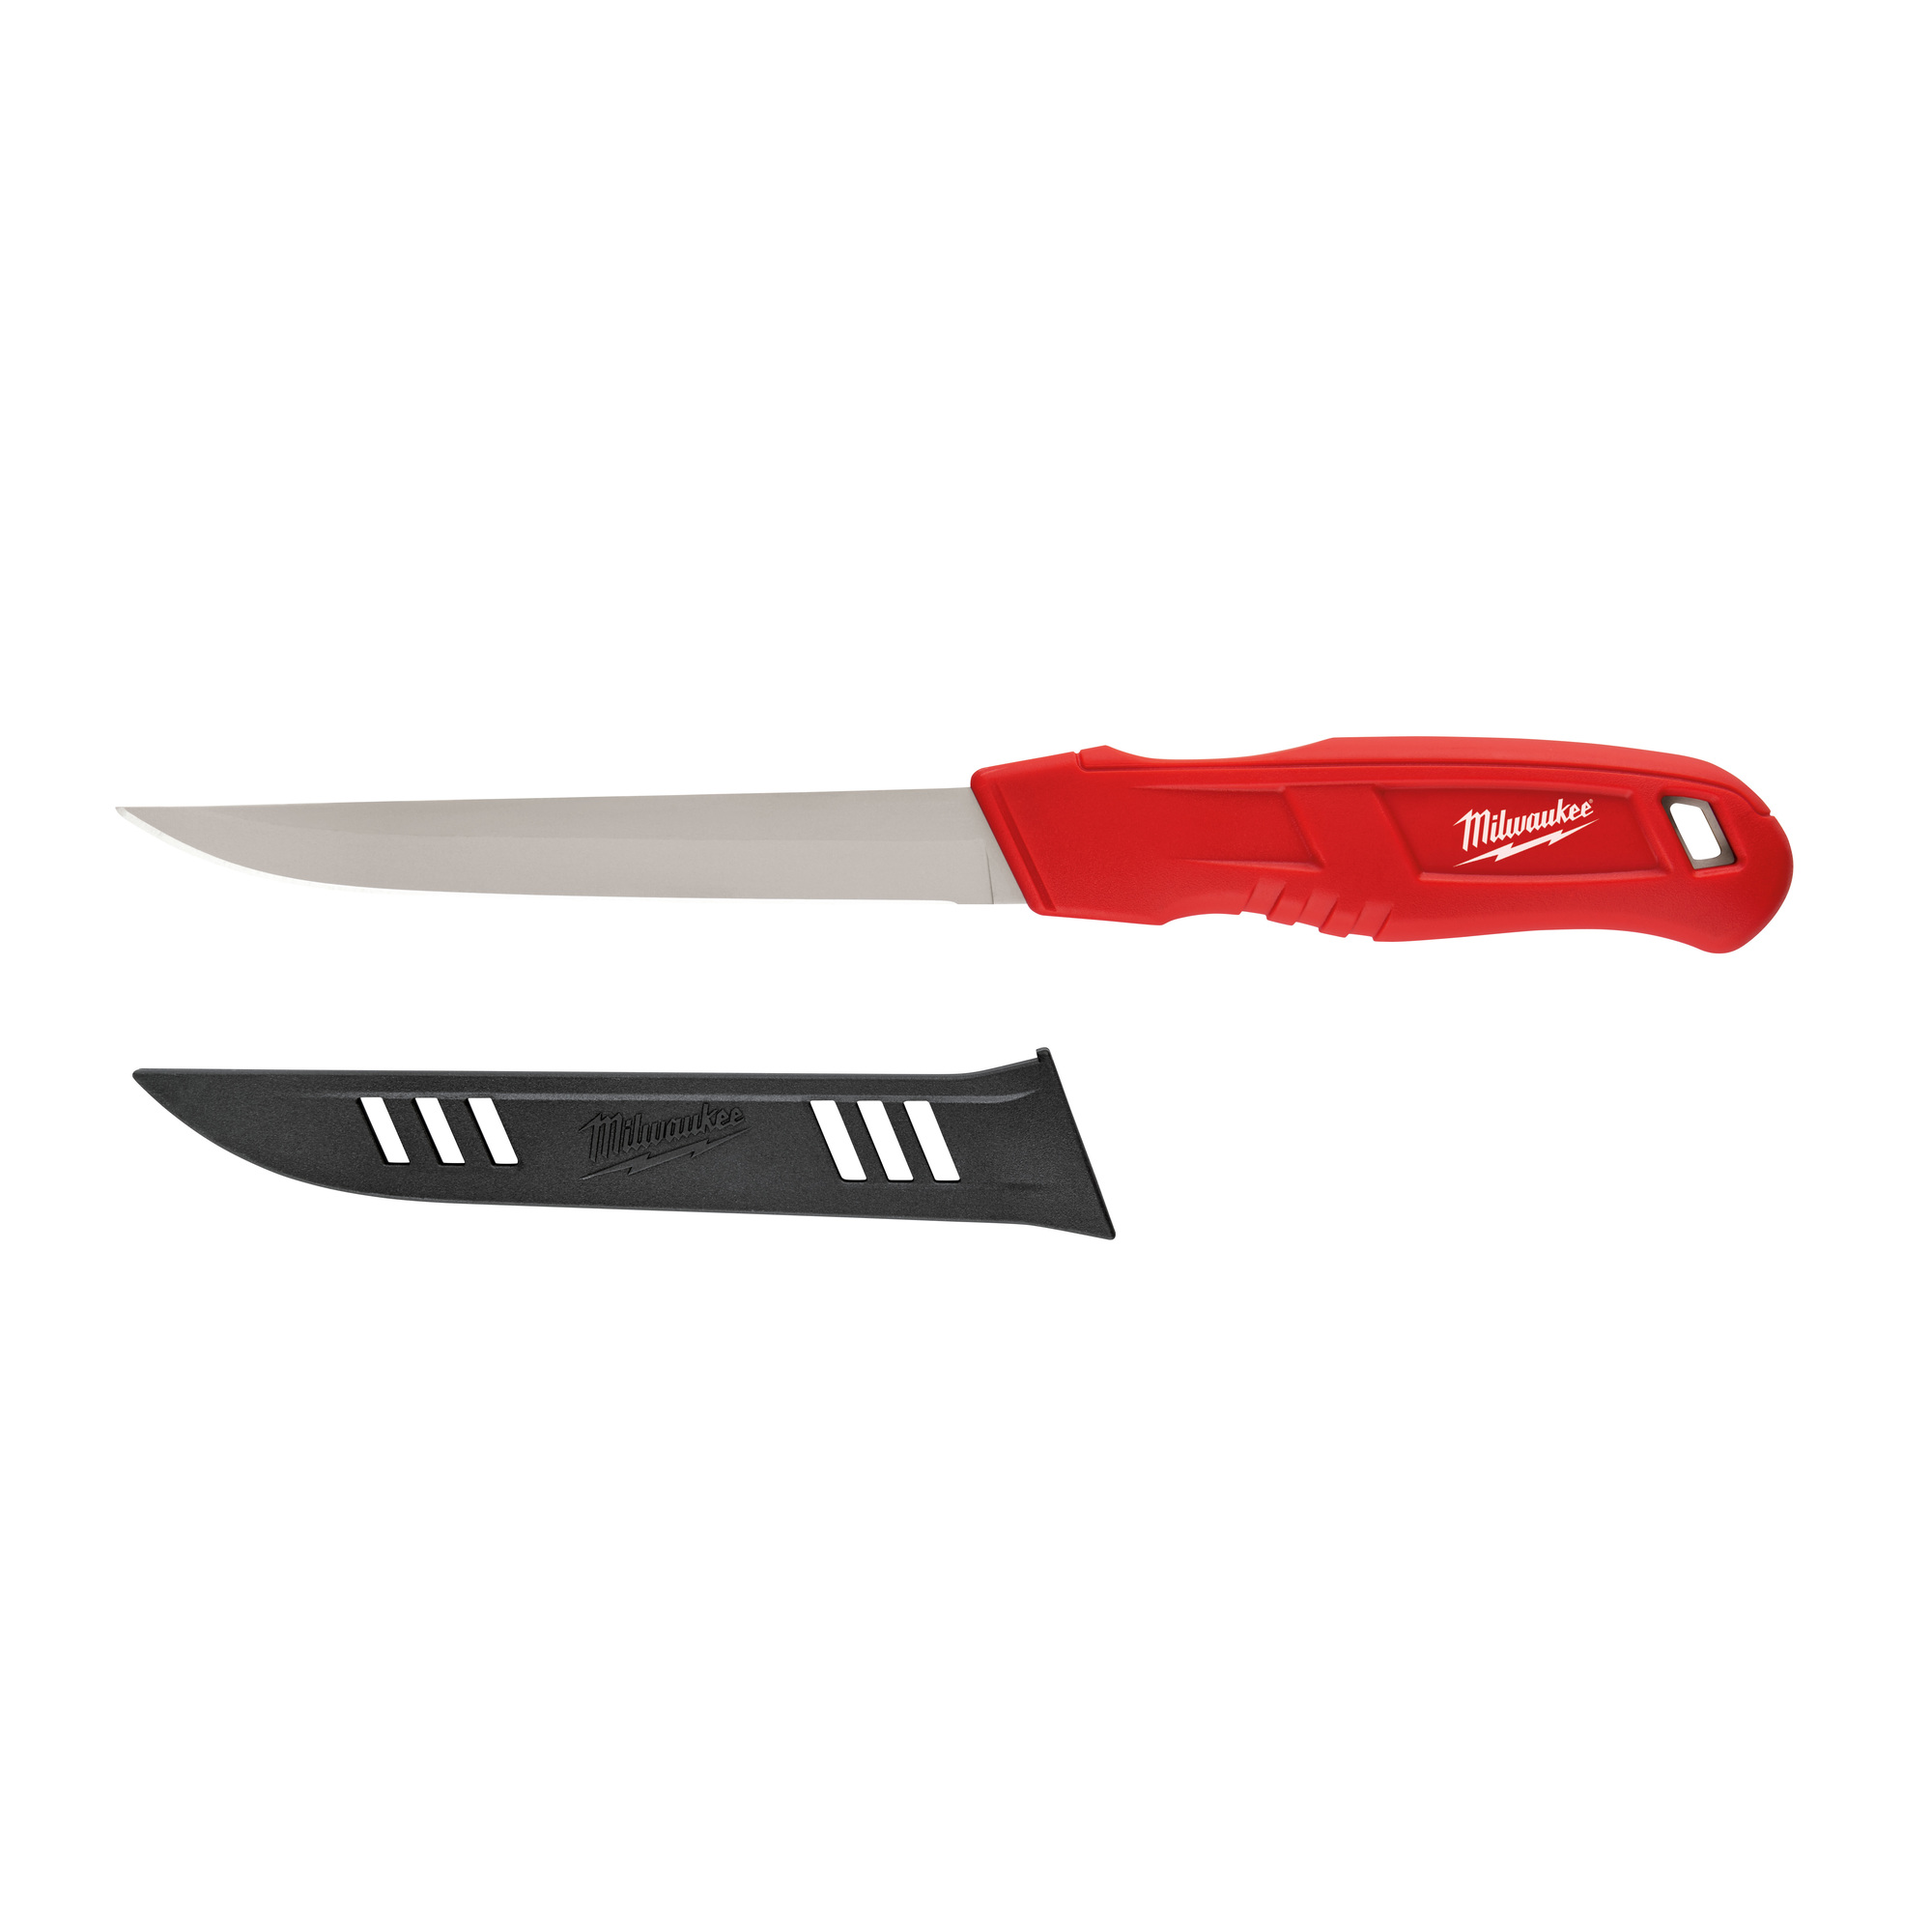 Milwaukee, Smooth Blade Insulation Knife, Blades (qty.) 1, Knives (qty.) 1, Model 48-22-1921